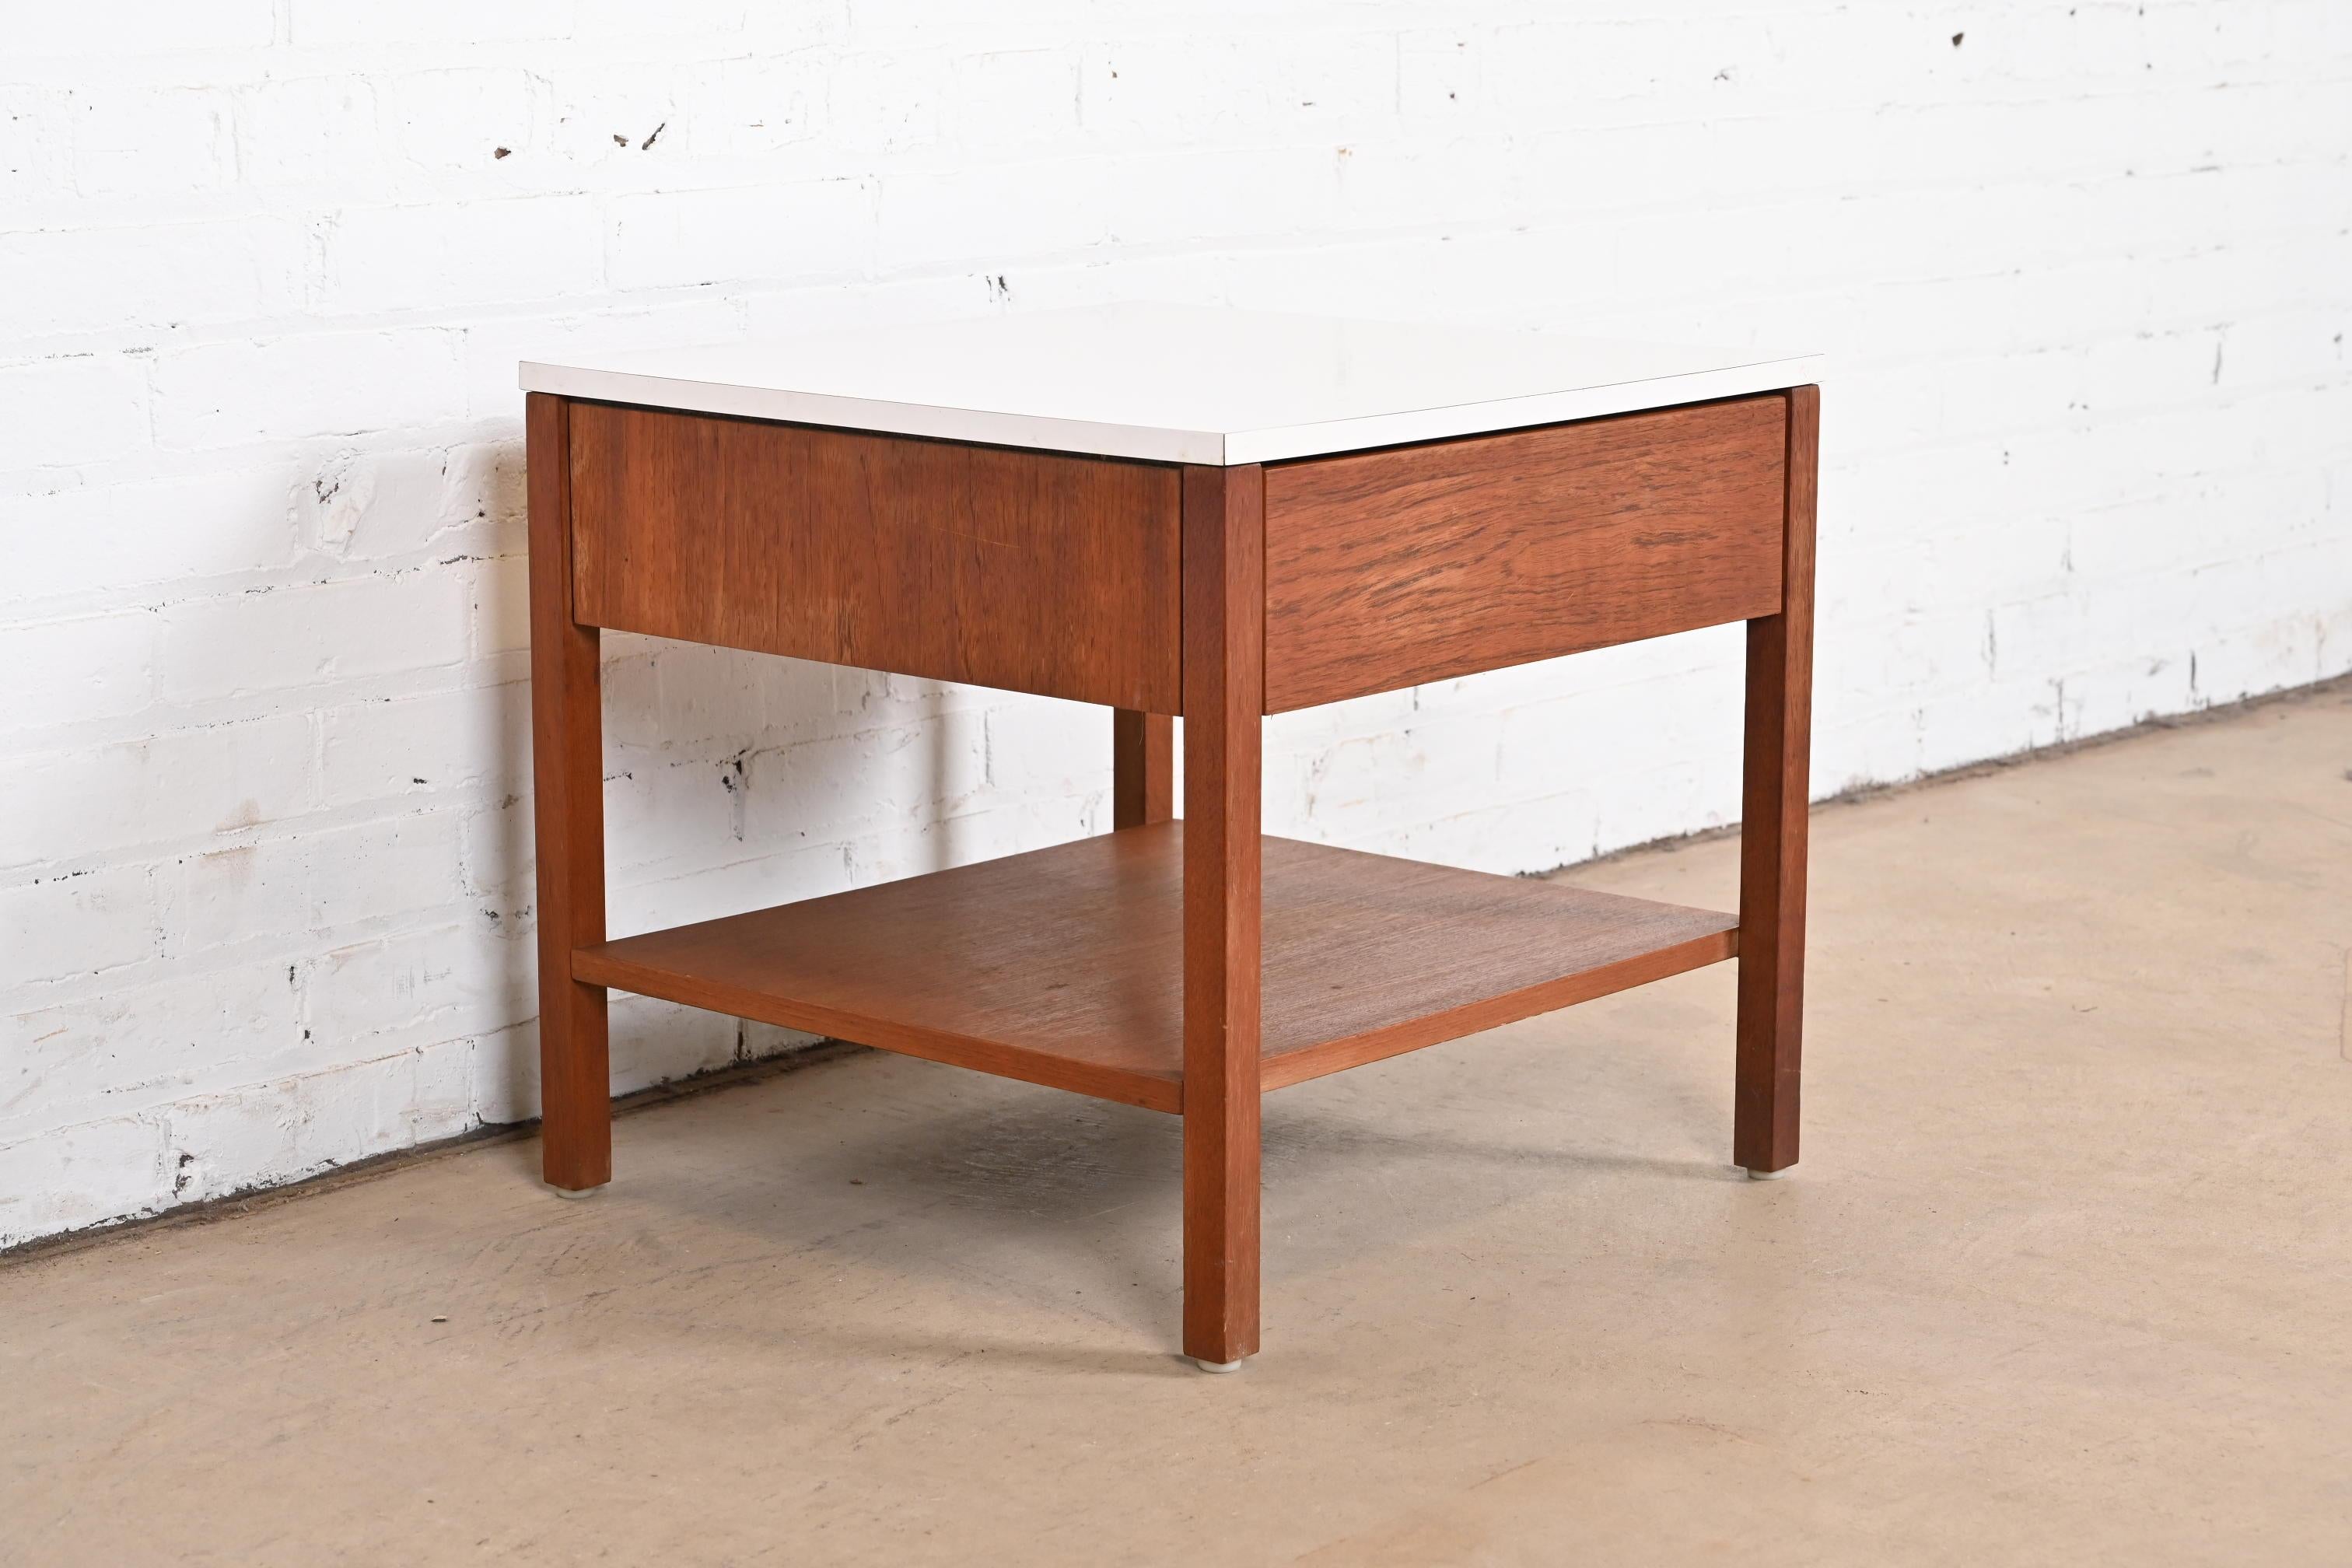 Laminate Florence Knoll Mid-Century Modern Walnut Nightstand or Side Table, circa 1960s